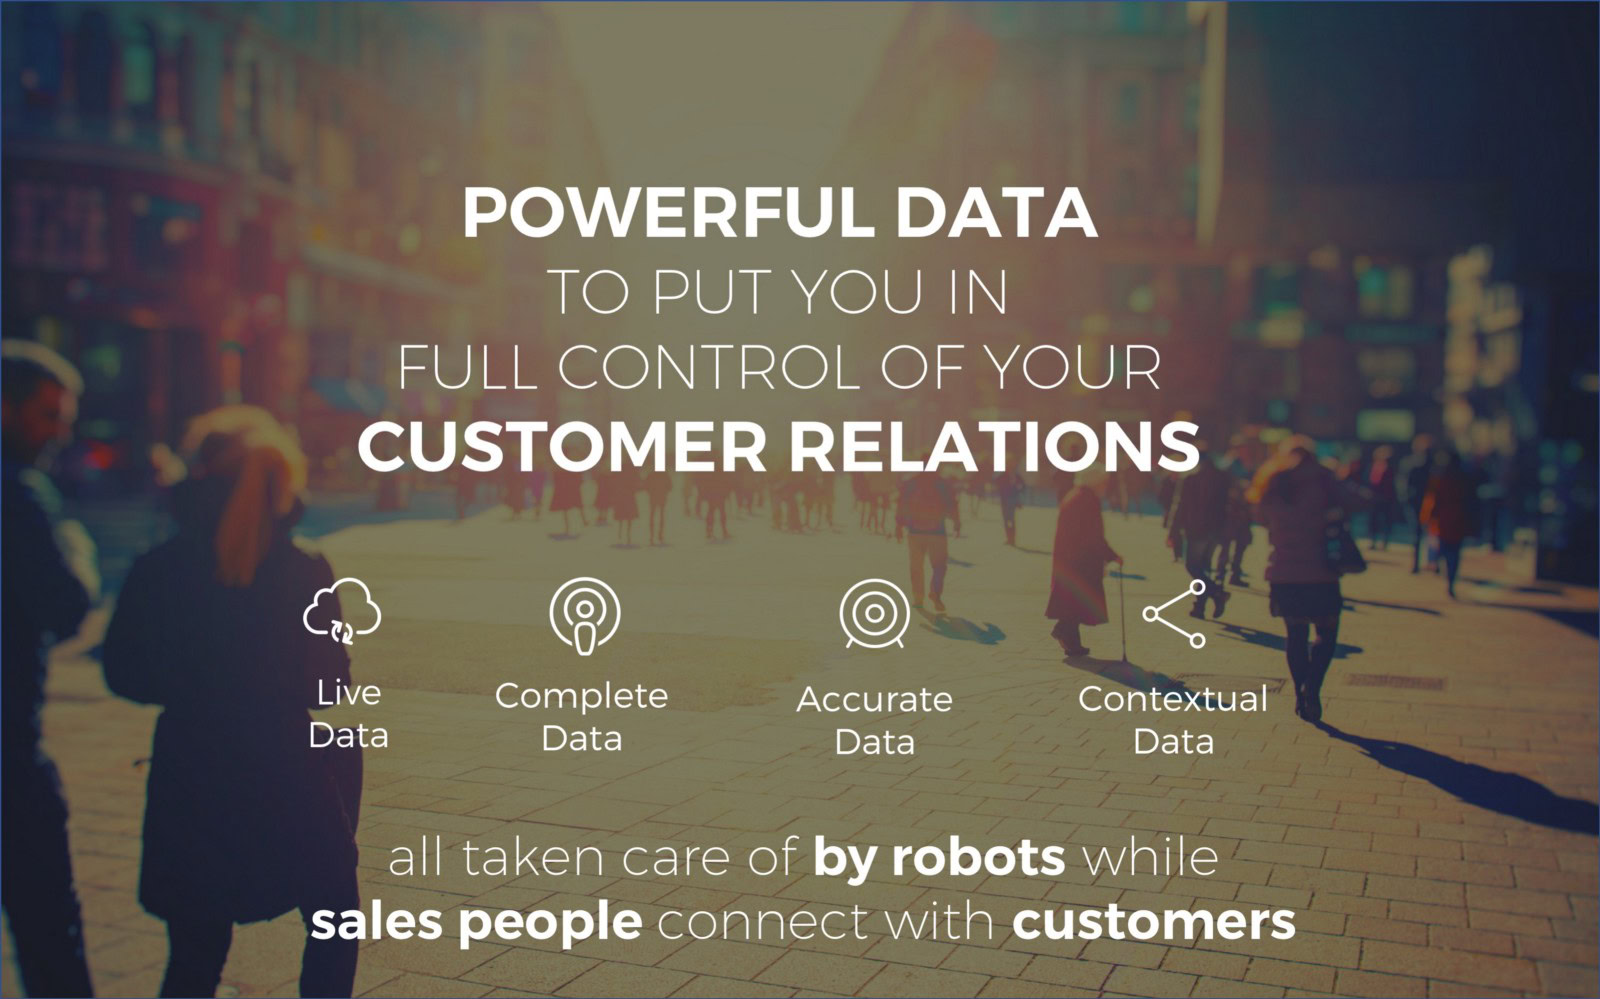 Powerful data to put you in full control of your customer relations - Salesflare sales deck